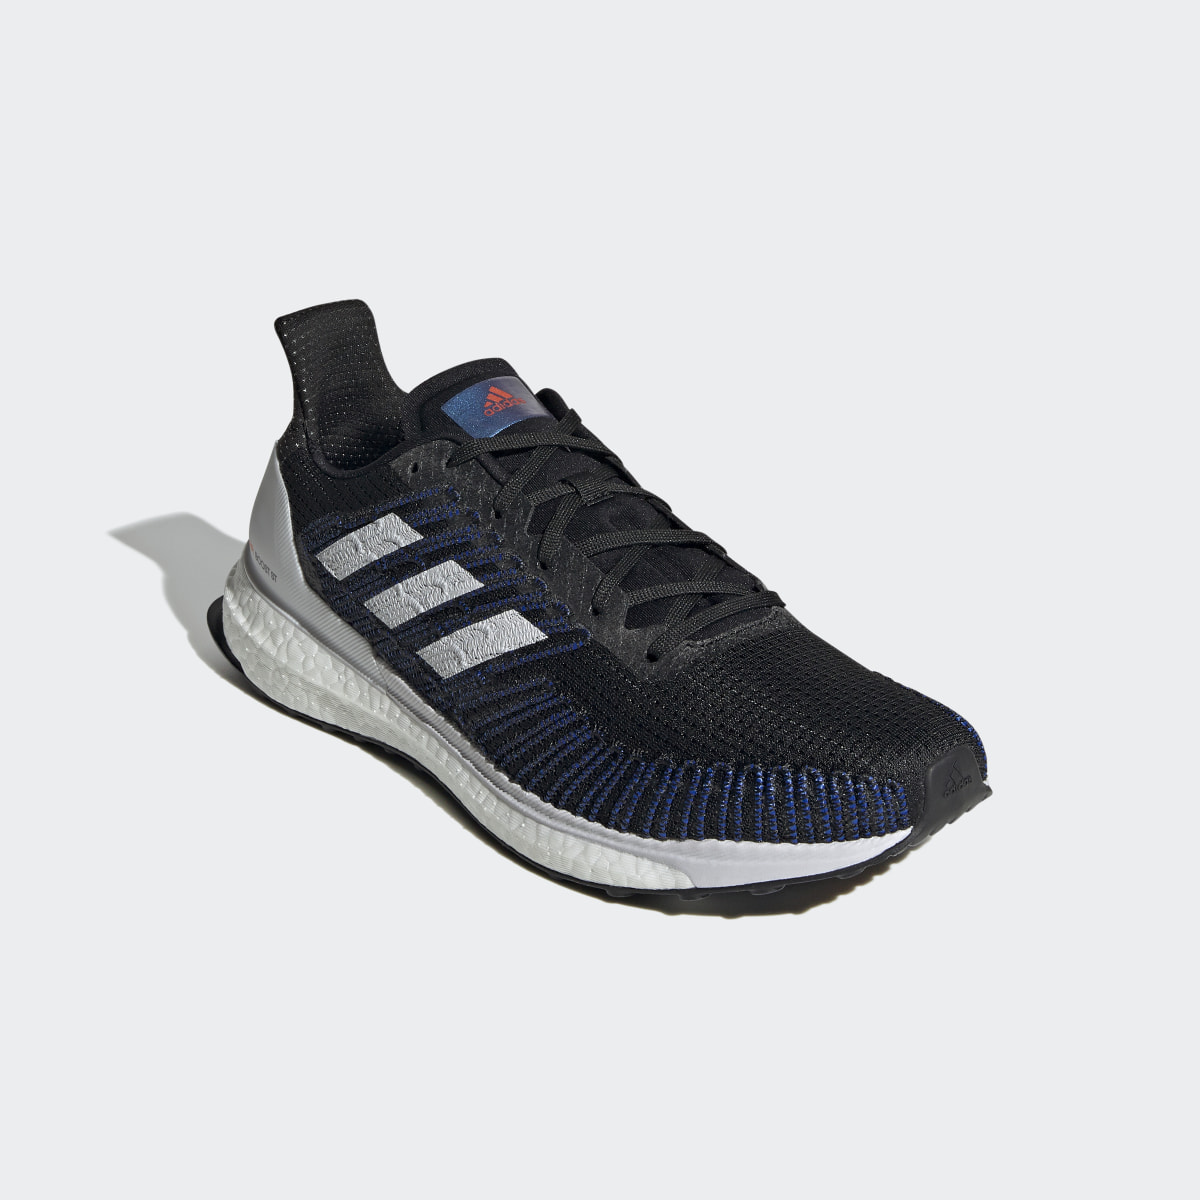 Adidas Solarboost ST 19 Shoes. 6